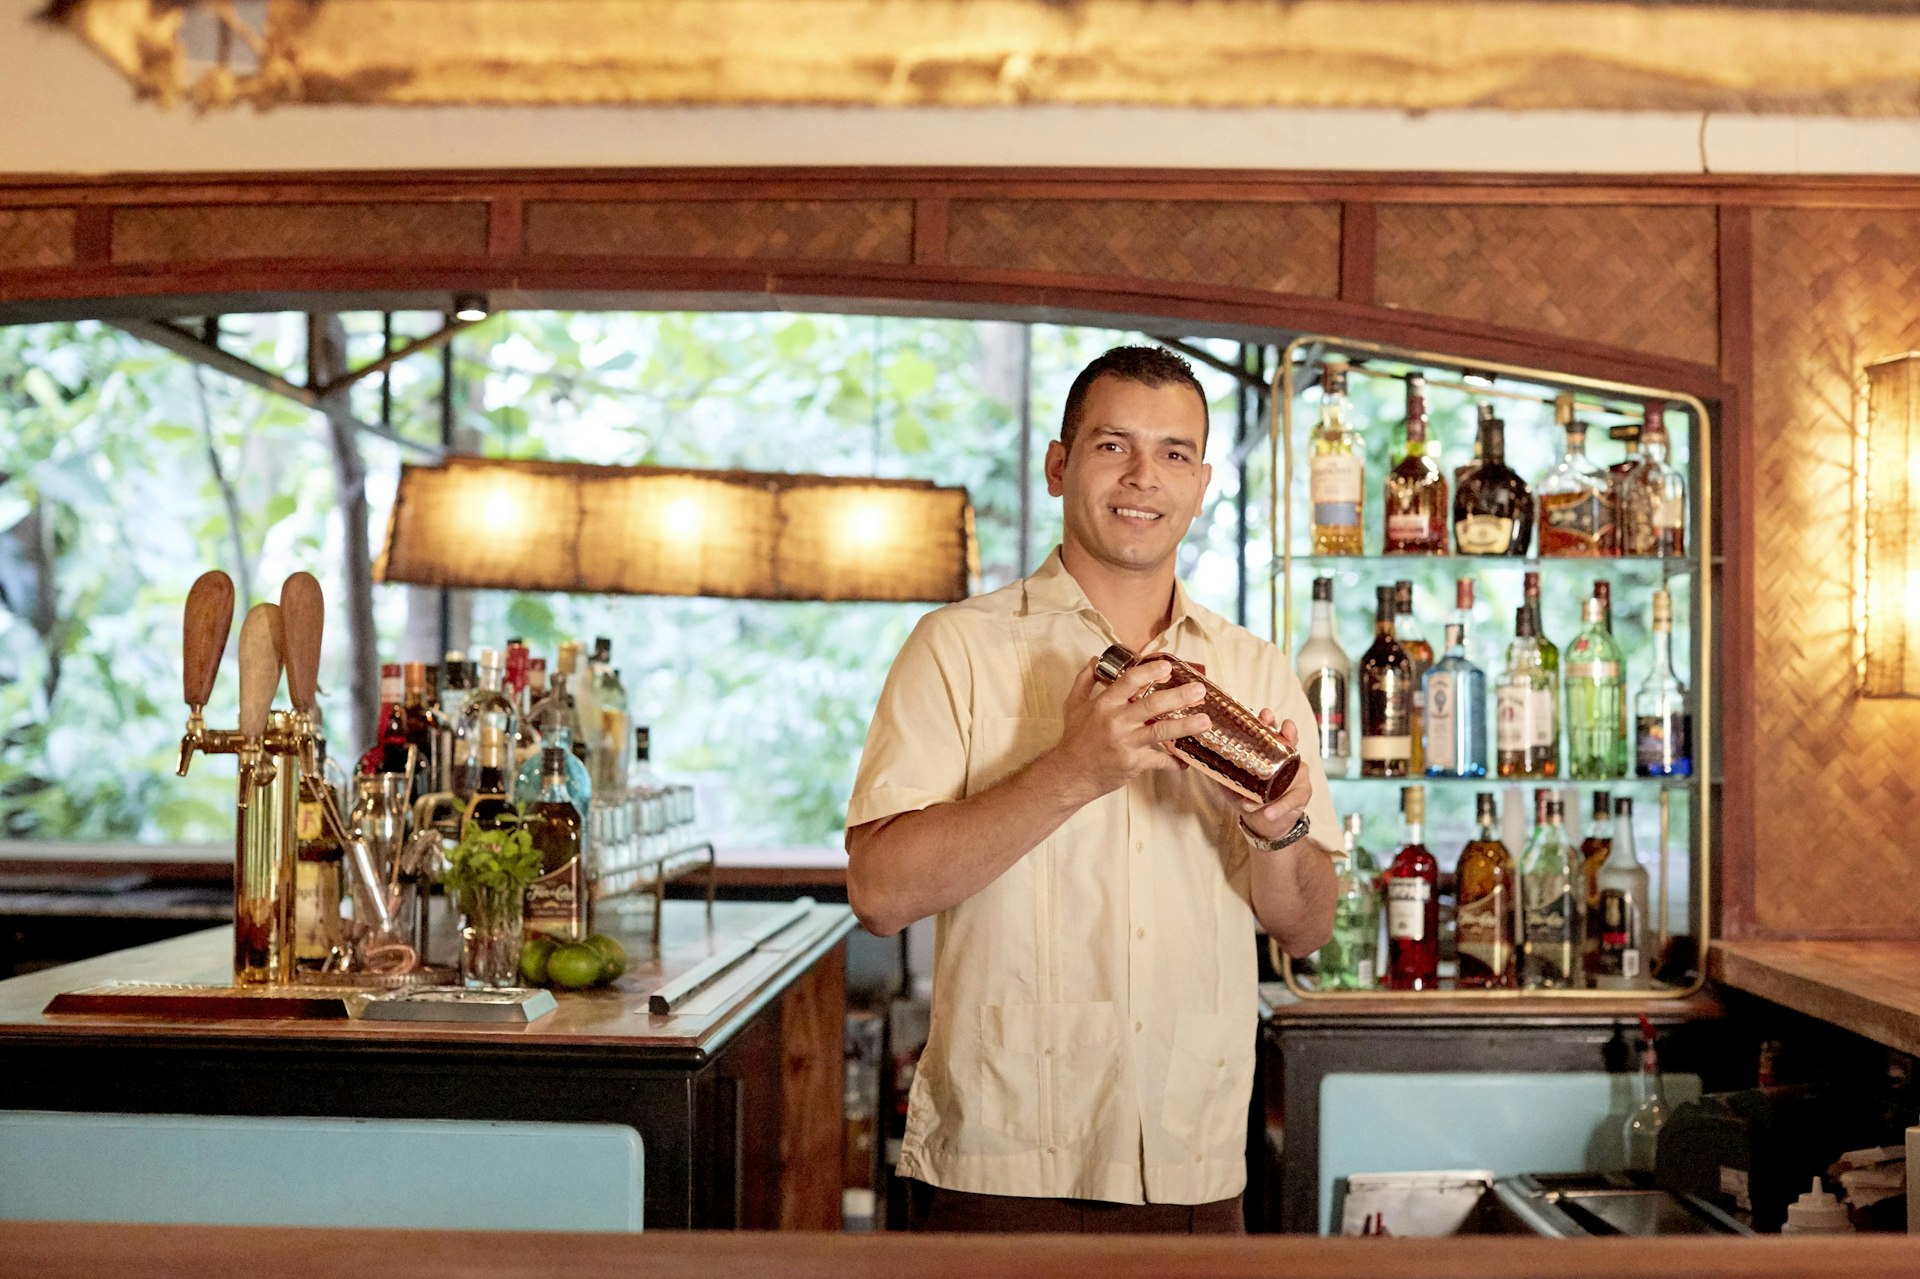 A man holding a cocktail shaker stands behind a well-stocked bar and smiles towards the camera